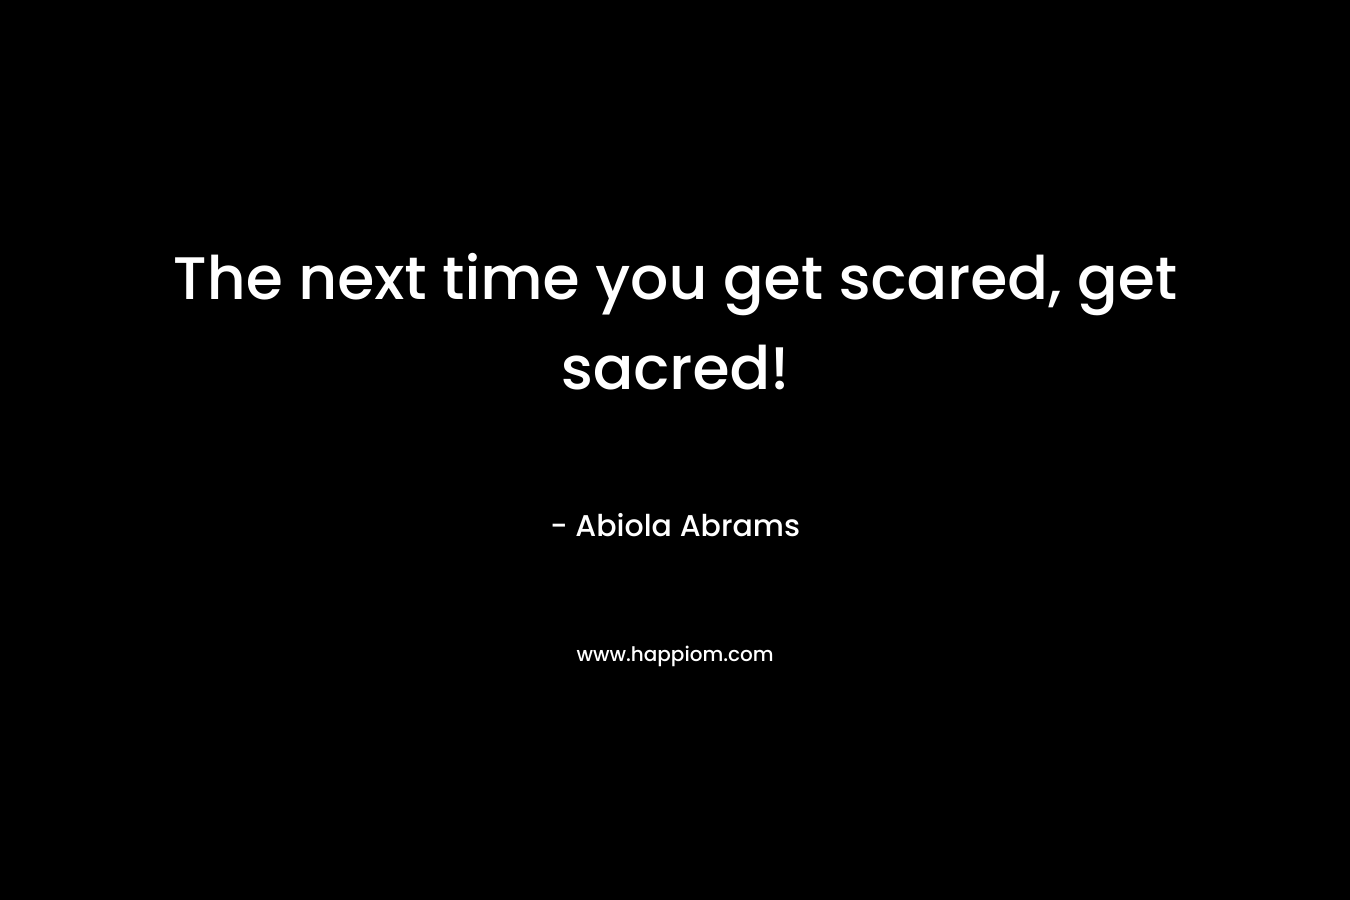 The next time you get scared, get sacred!